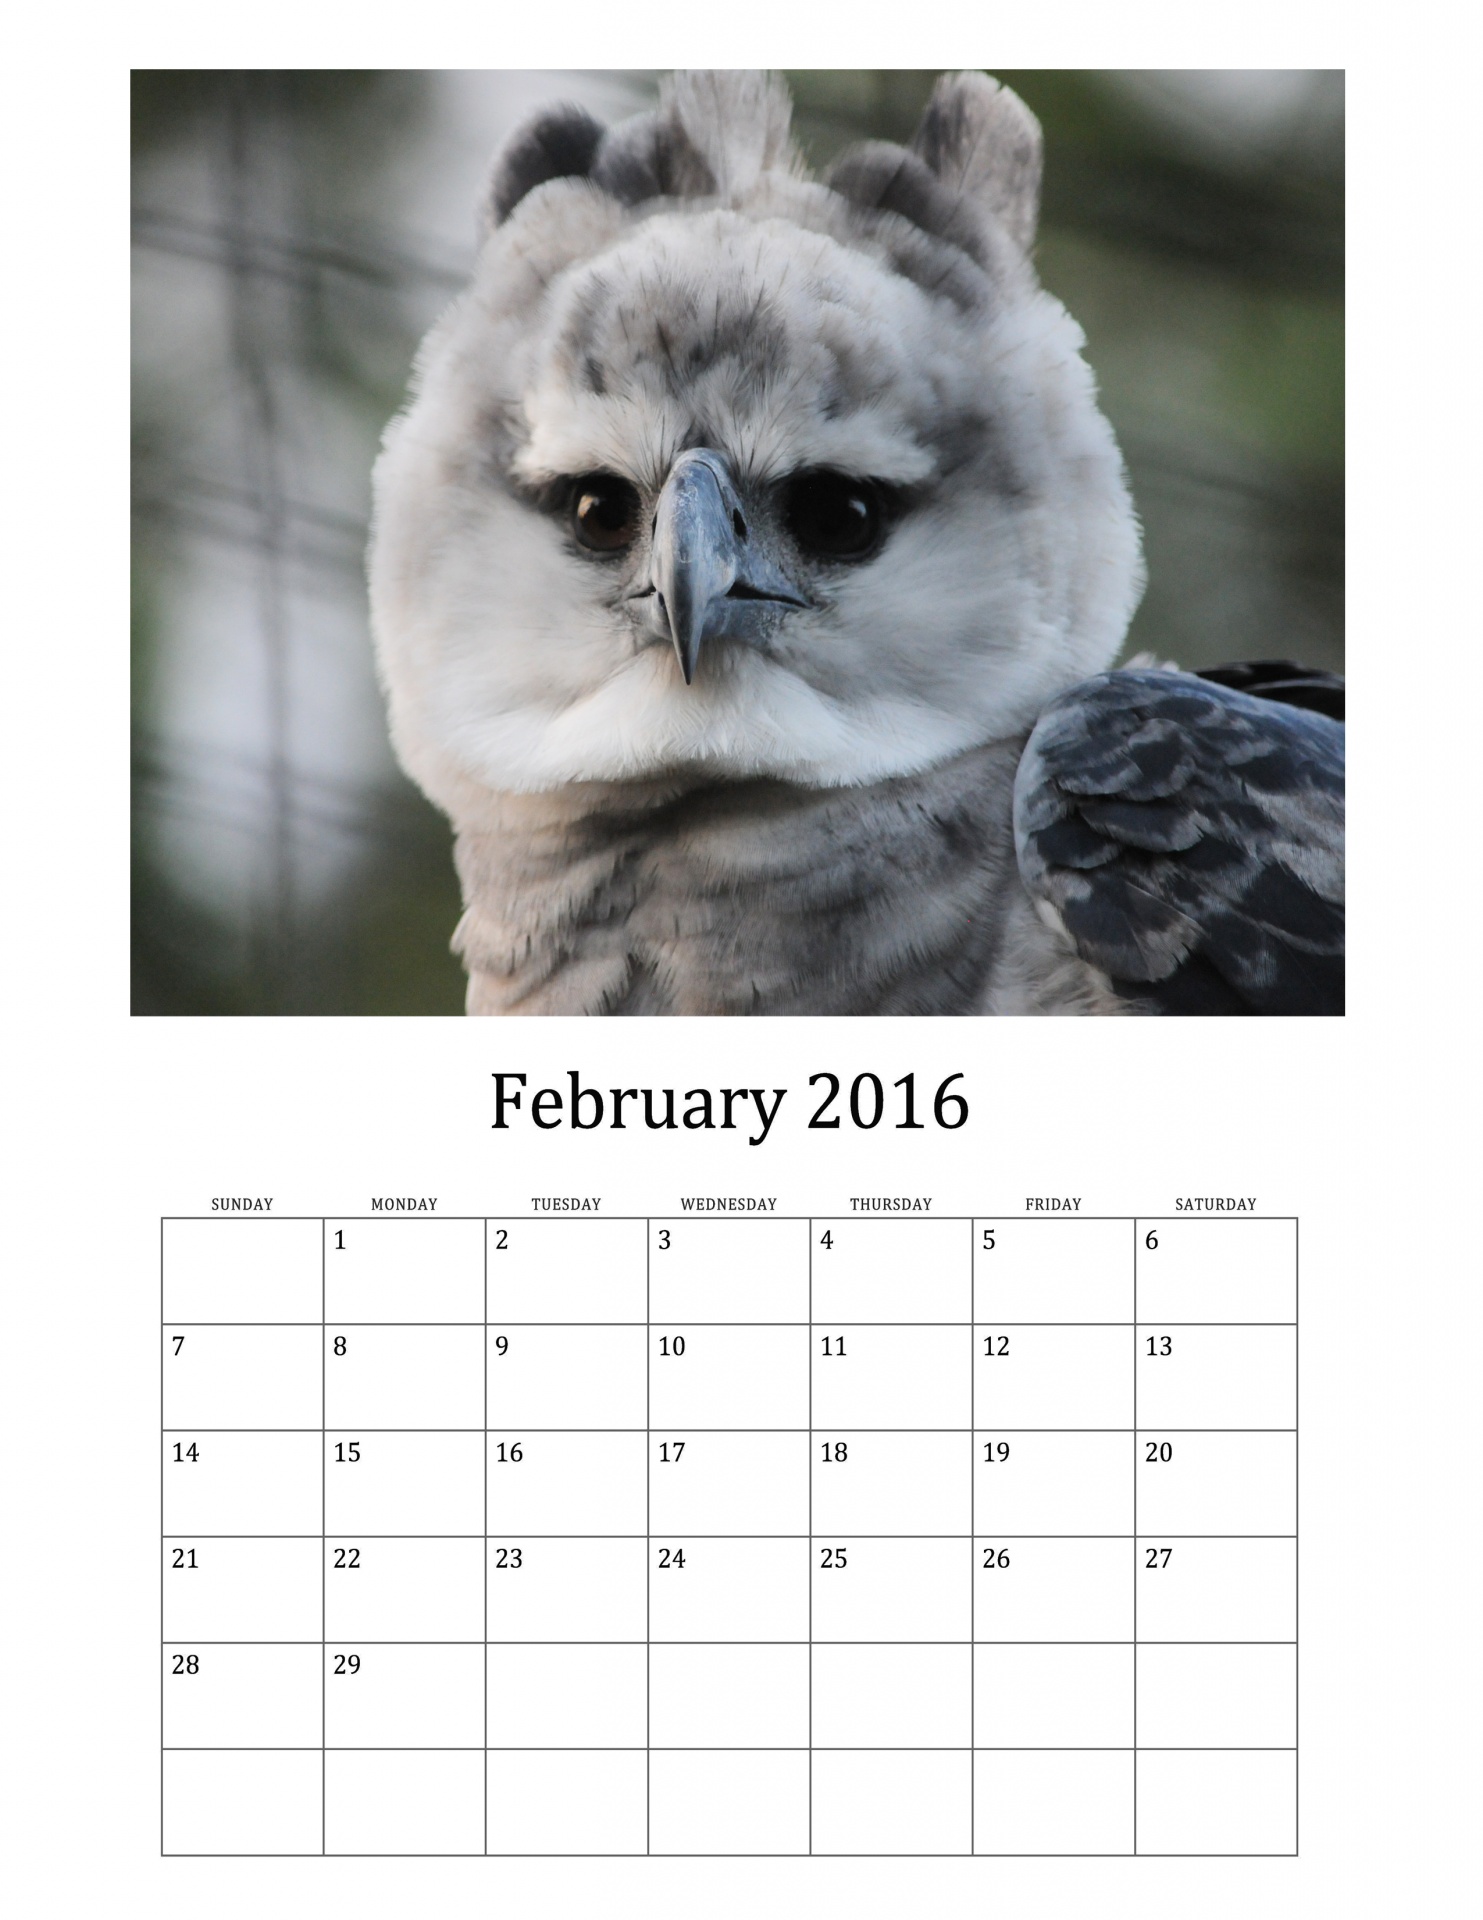 february-2016-calendar-of-birds-free-stock-photo-public-domain-pictures